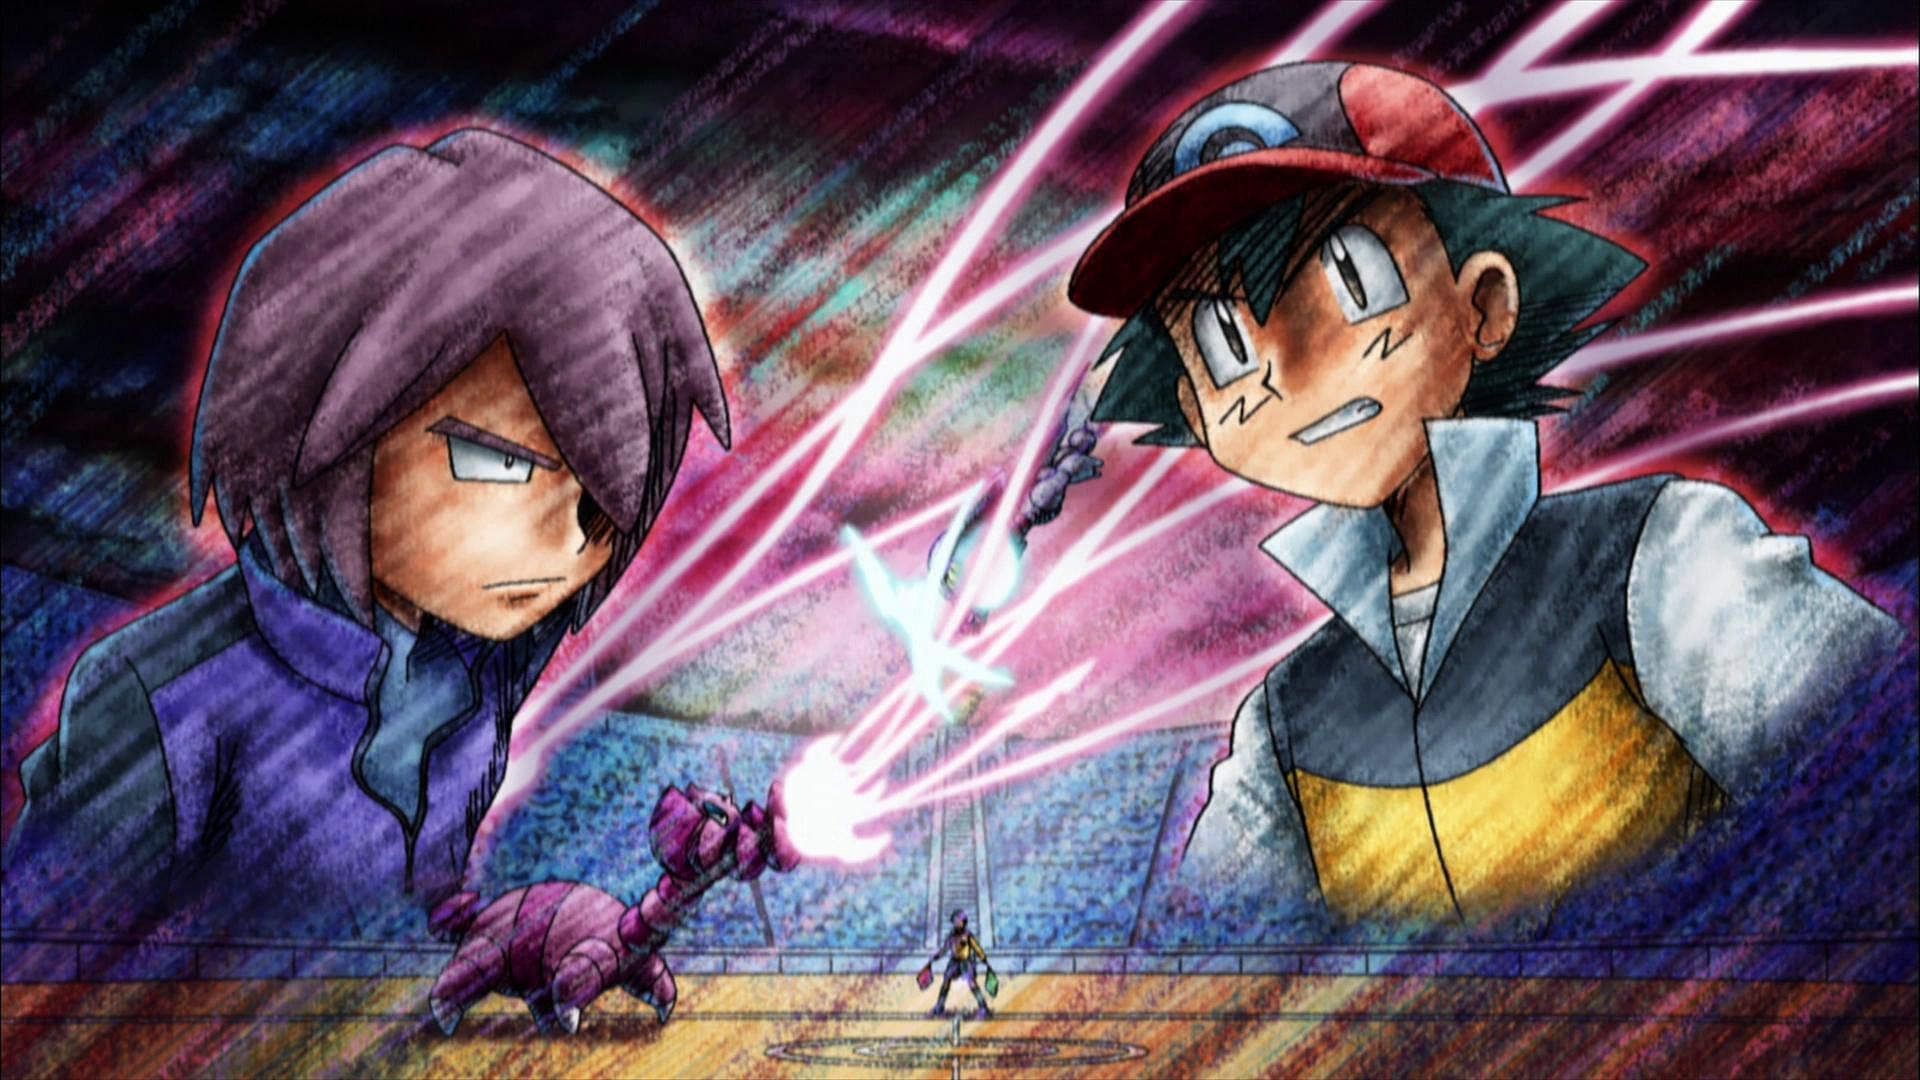 Paul and Ash pushed each other to become better (Image credit: OLM Incorporated, Pokemon: Diamond and Pearl)